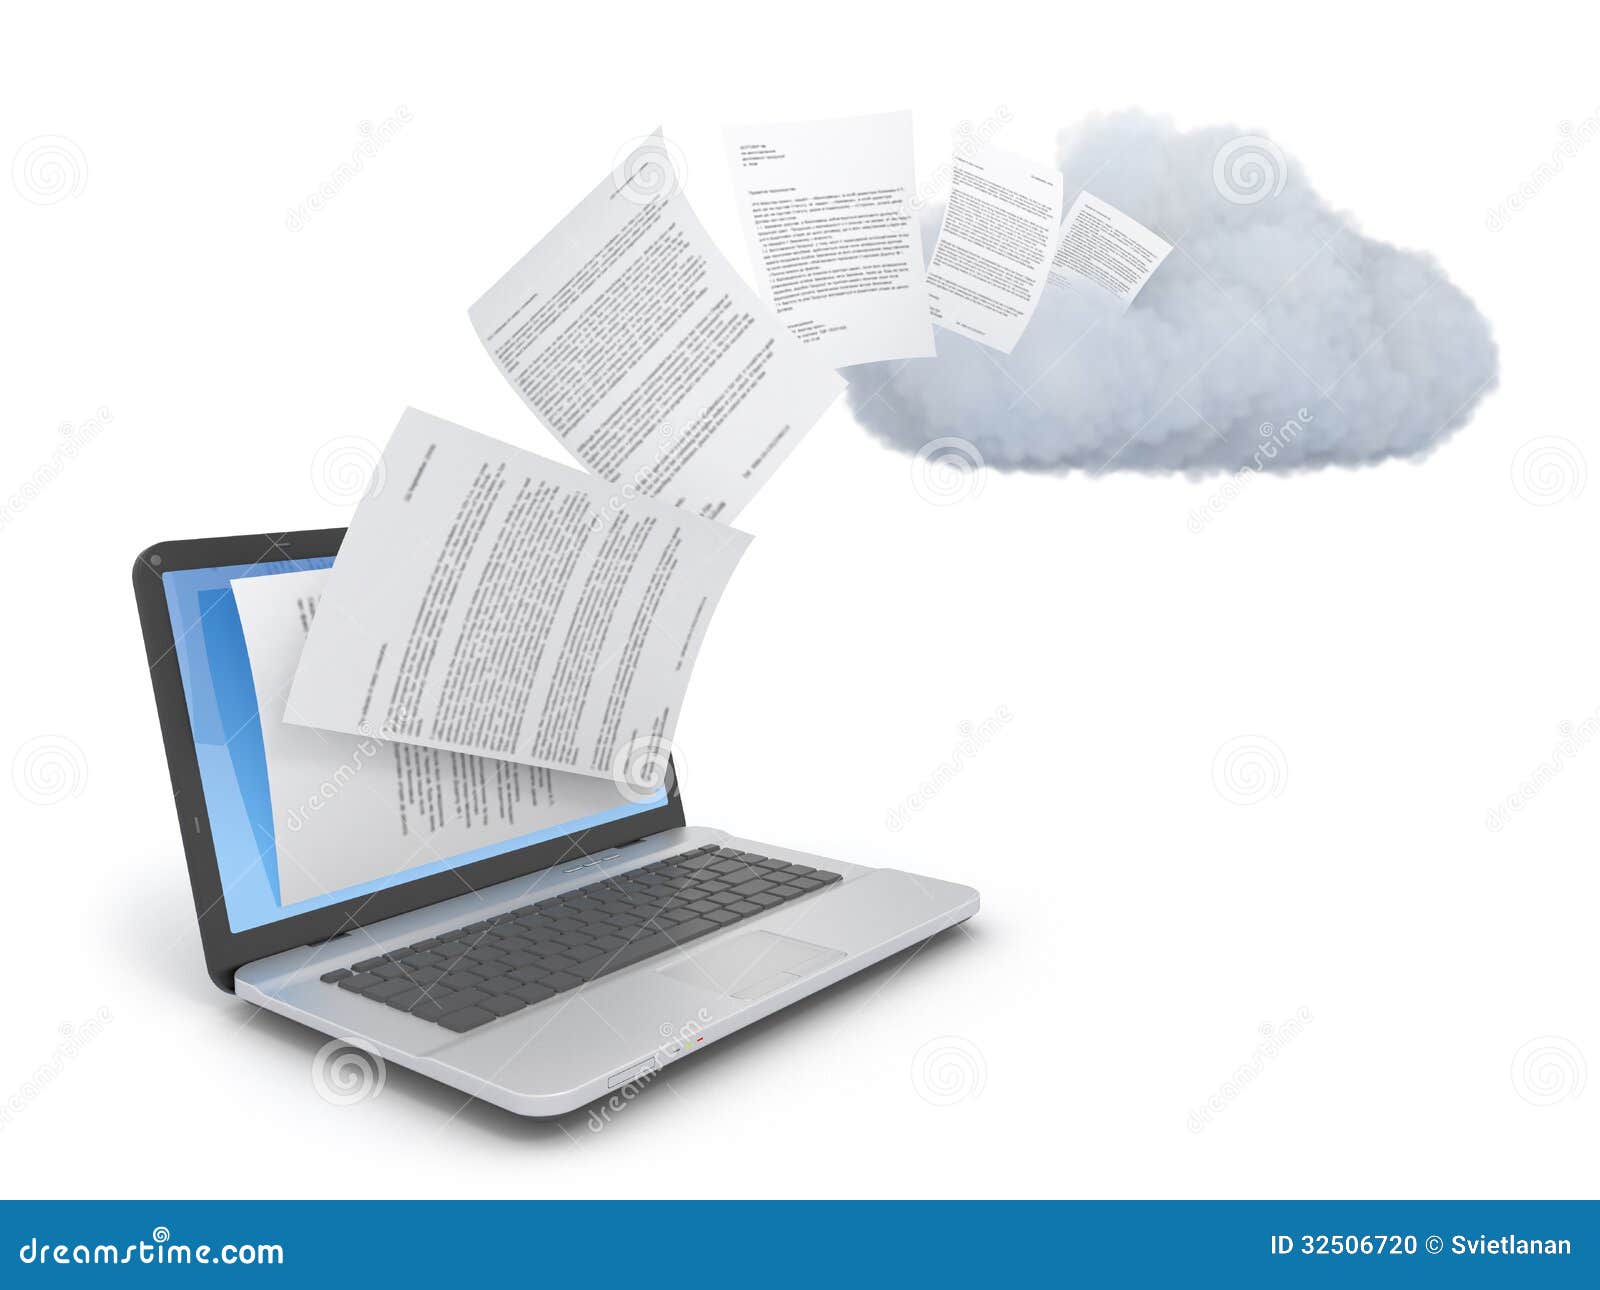 Transferring Documents Or Data To A Cloud. Stock Photo - Image: 32506720